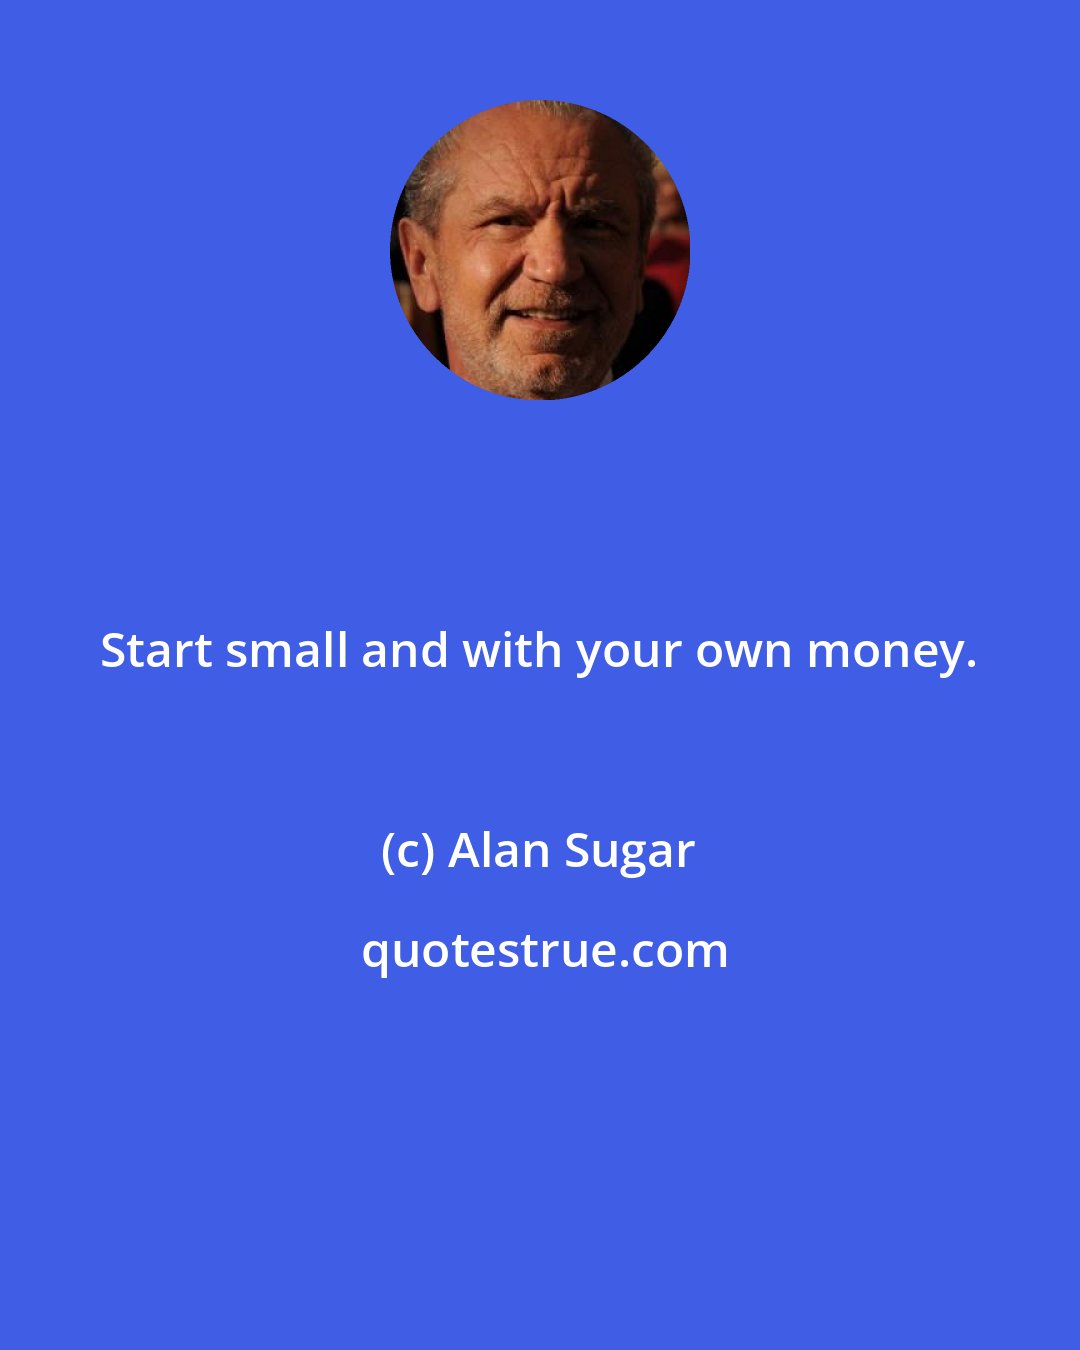 Alan Sugar: Start small and with your own money.